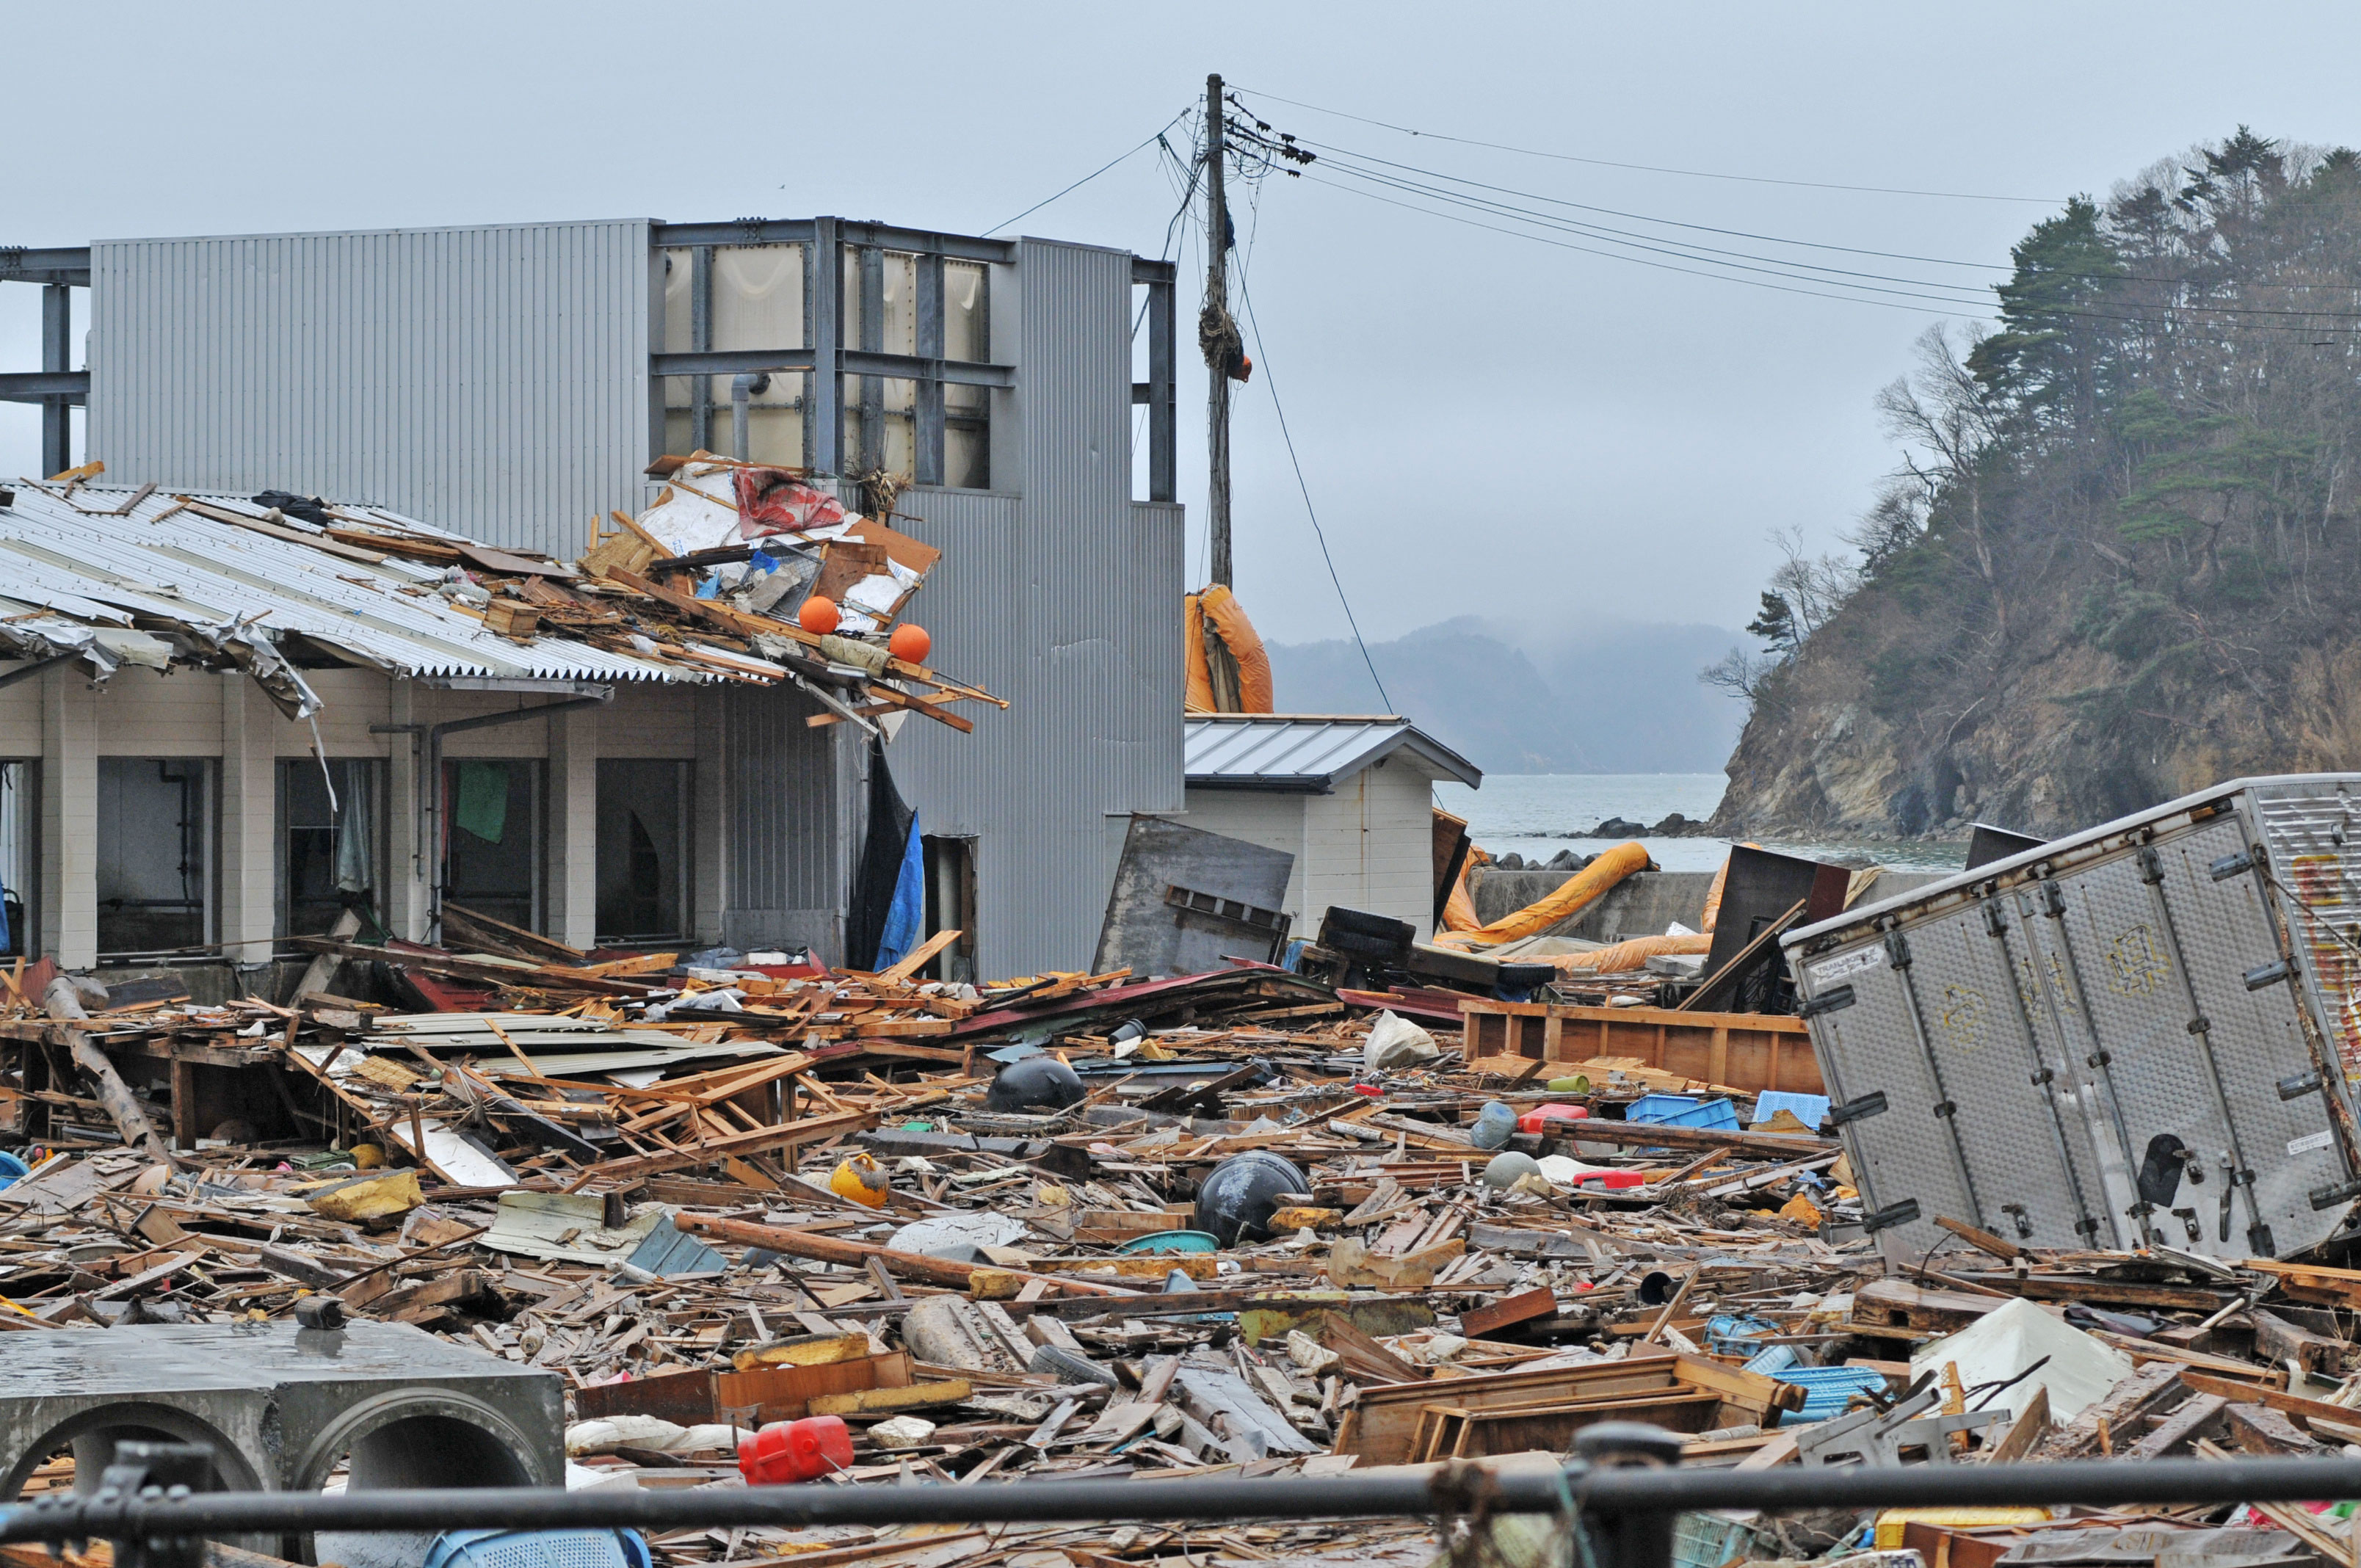 Damage from the 9.0 magnitude Tōhoku earthquake and tsunami that struck Japan on March 11, 2011.